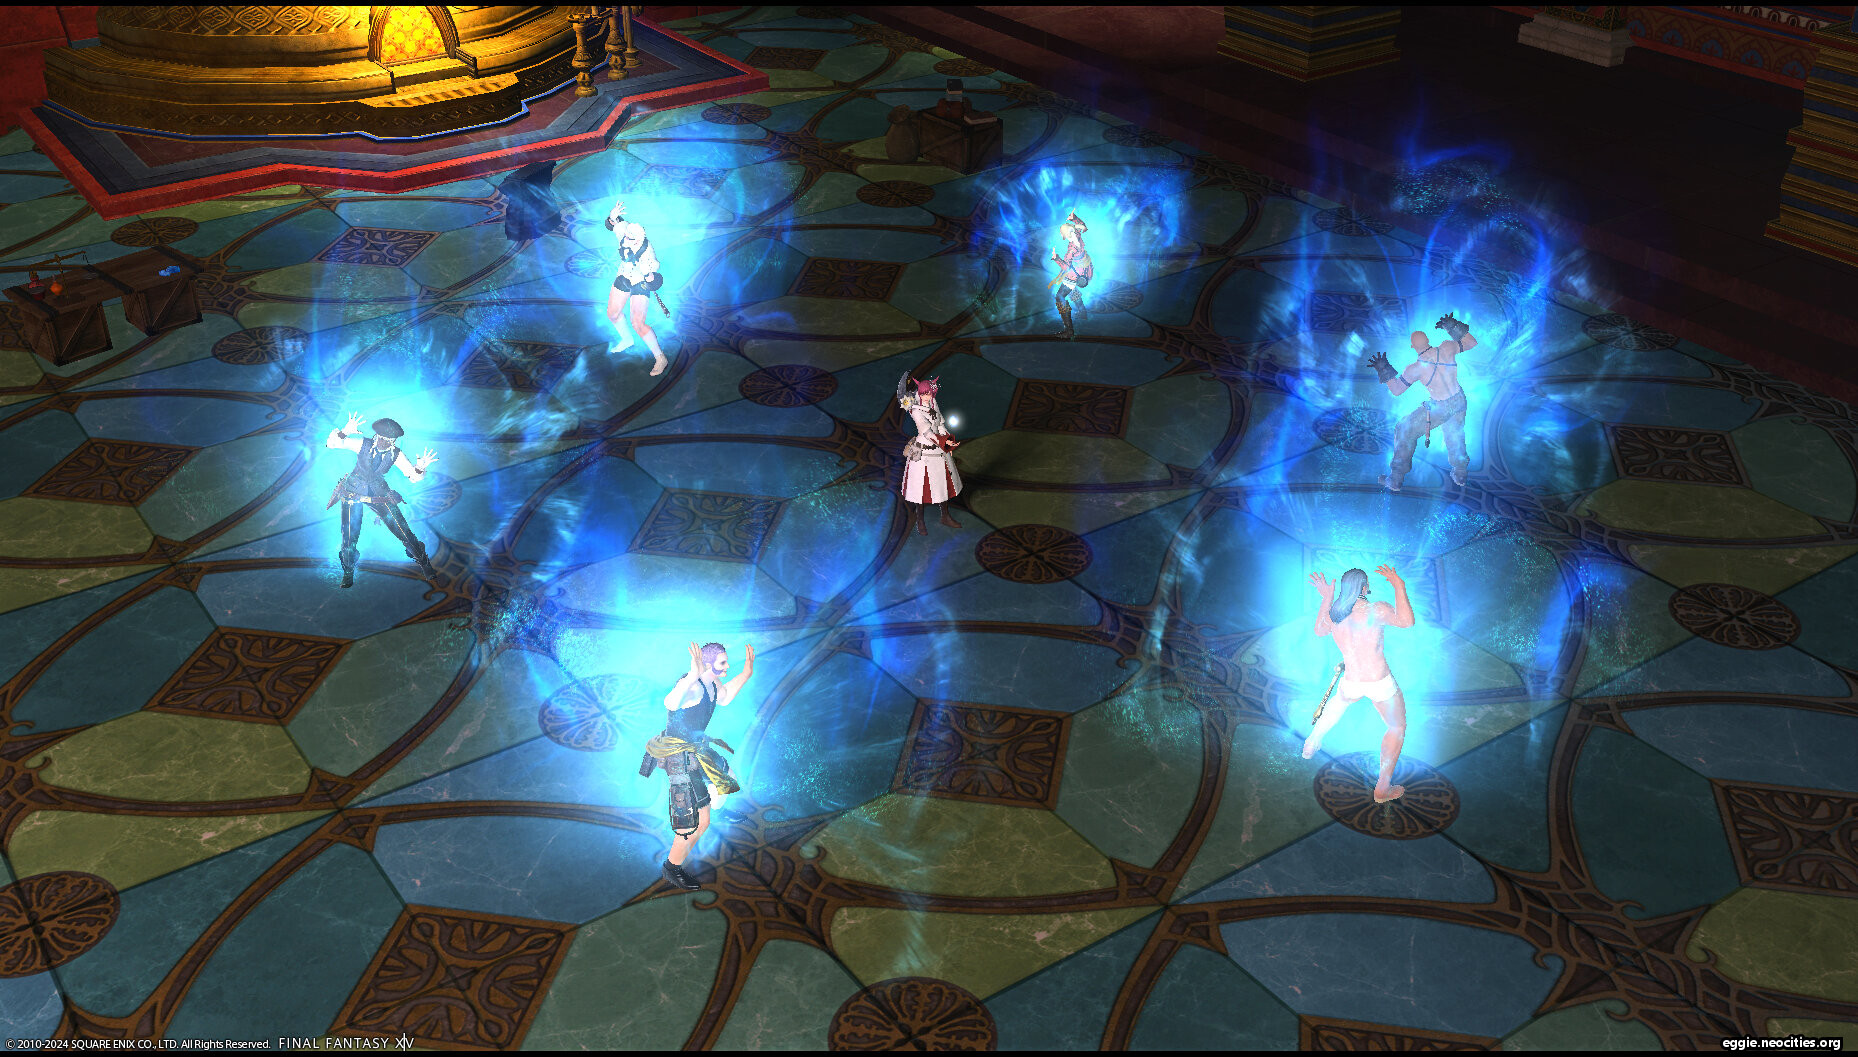 A scene from the Manderville relic quests finale. The NPCs involved are dancing the Manderville in a circle around Zel while they glow blue.